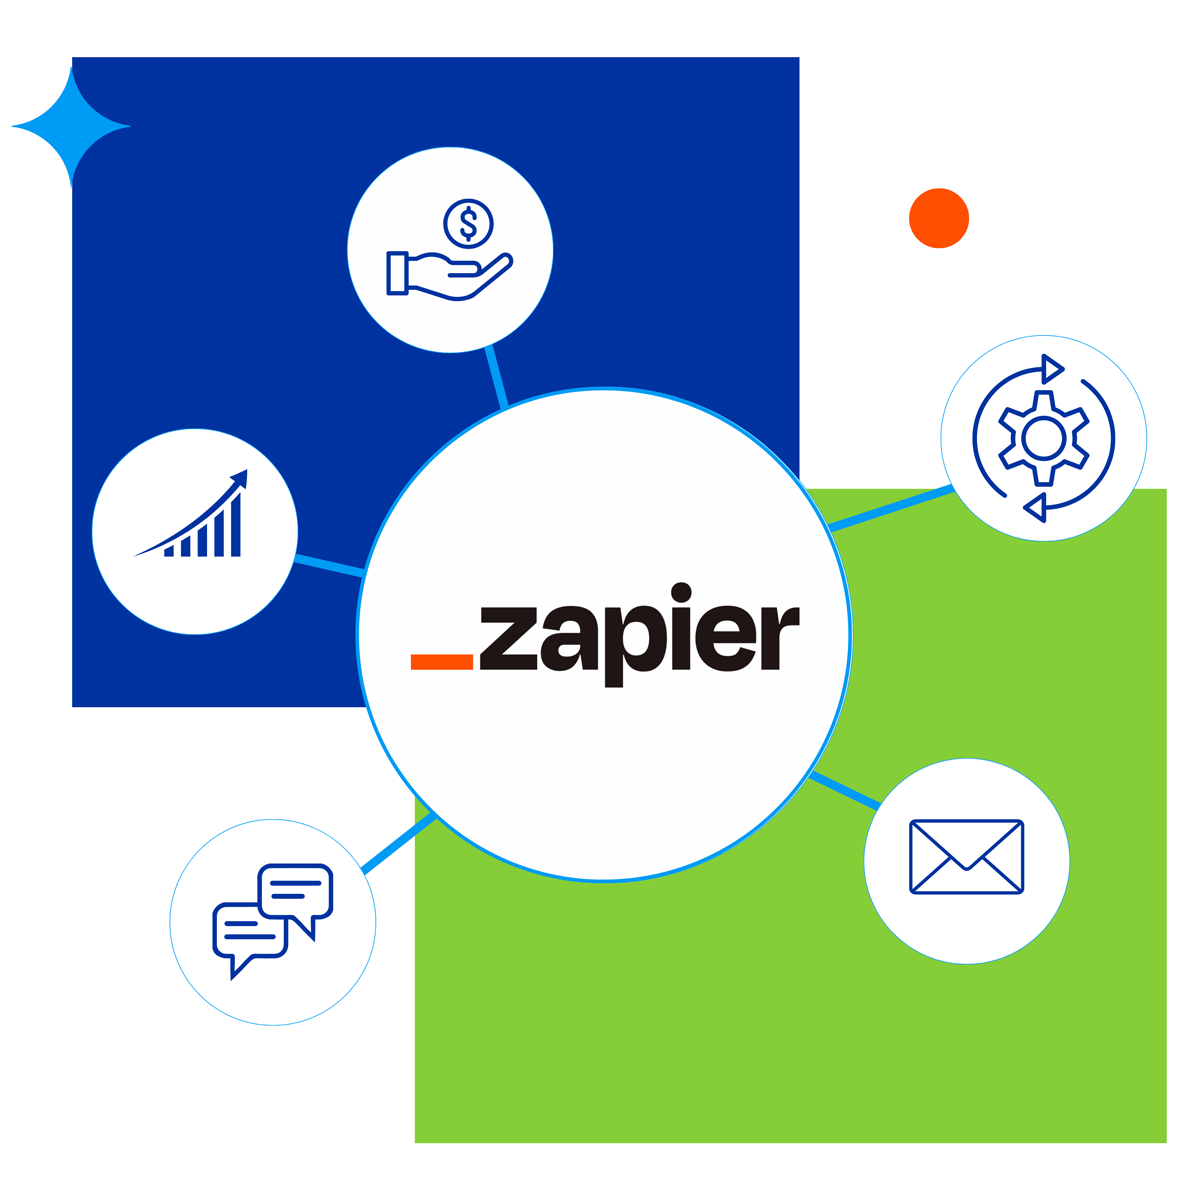 Jackrabbit Class and Zapier integration image with icons